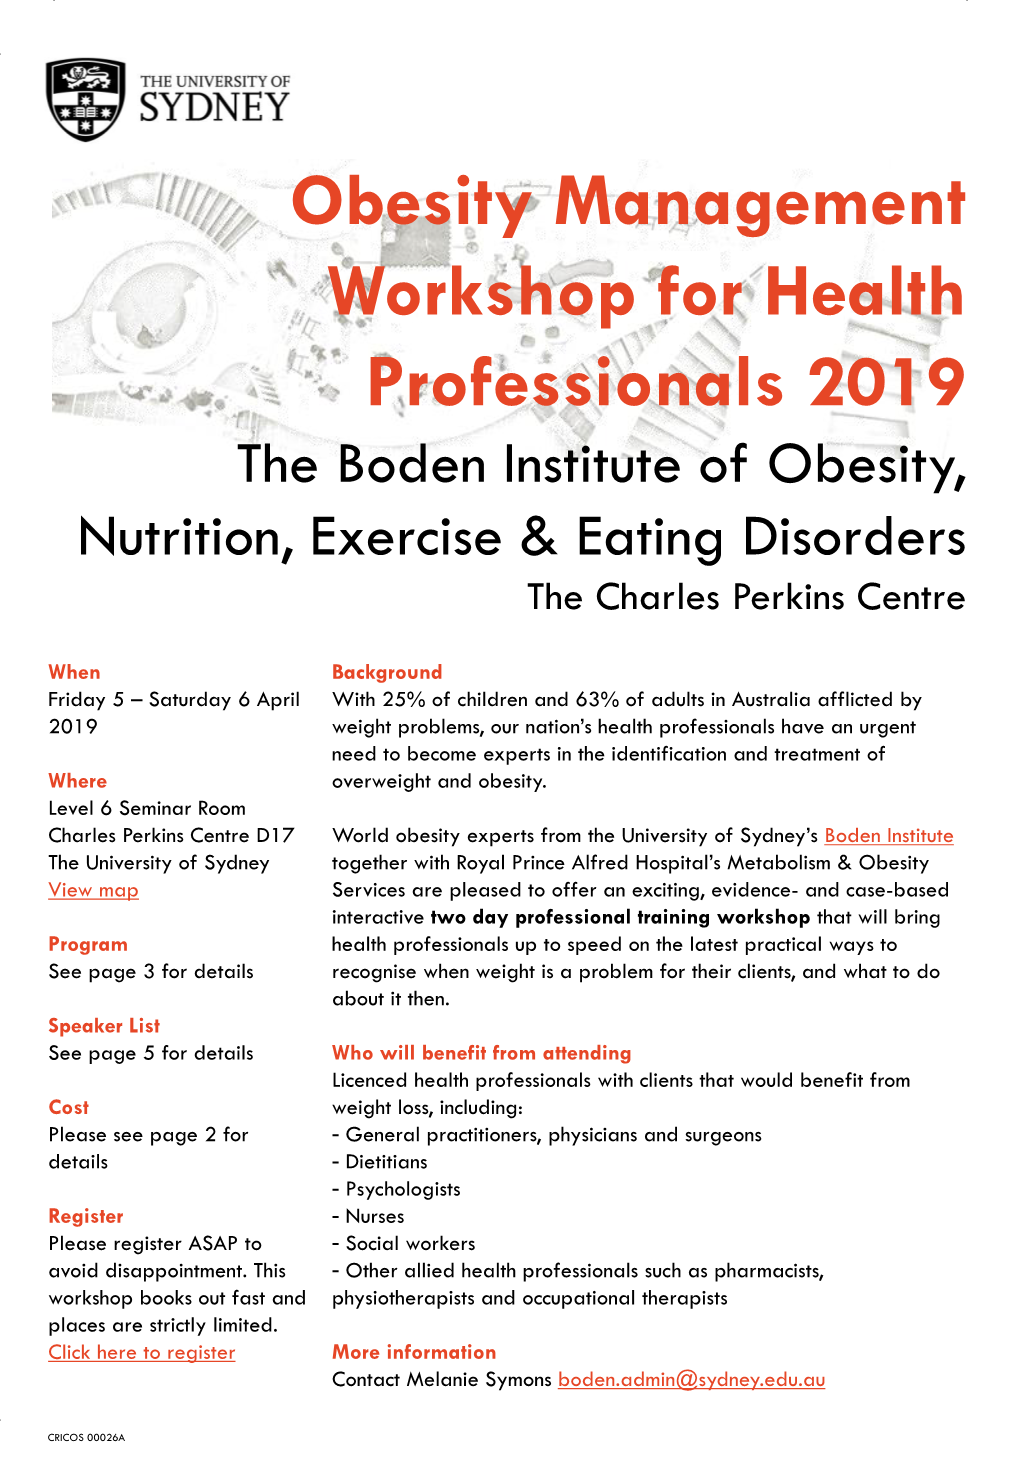 Obesity Management Workshop for Health Professionals 2019 the Boden Institute of Obesity, Nutrition, Exercise & Eating Disorders the Charles Perkins Centre